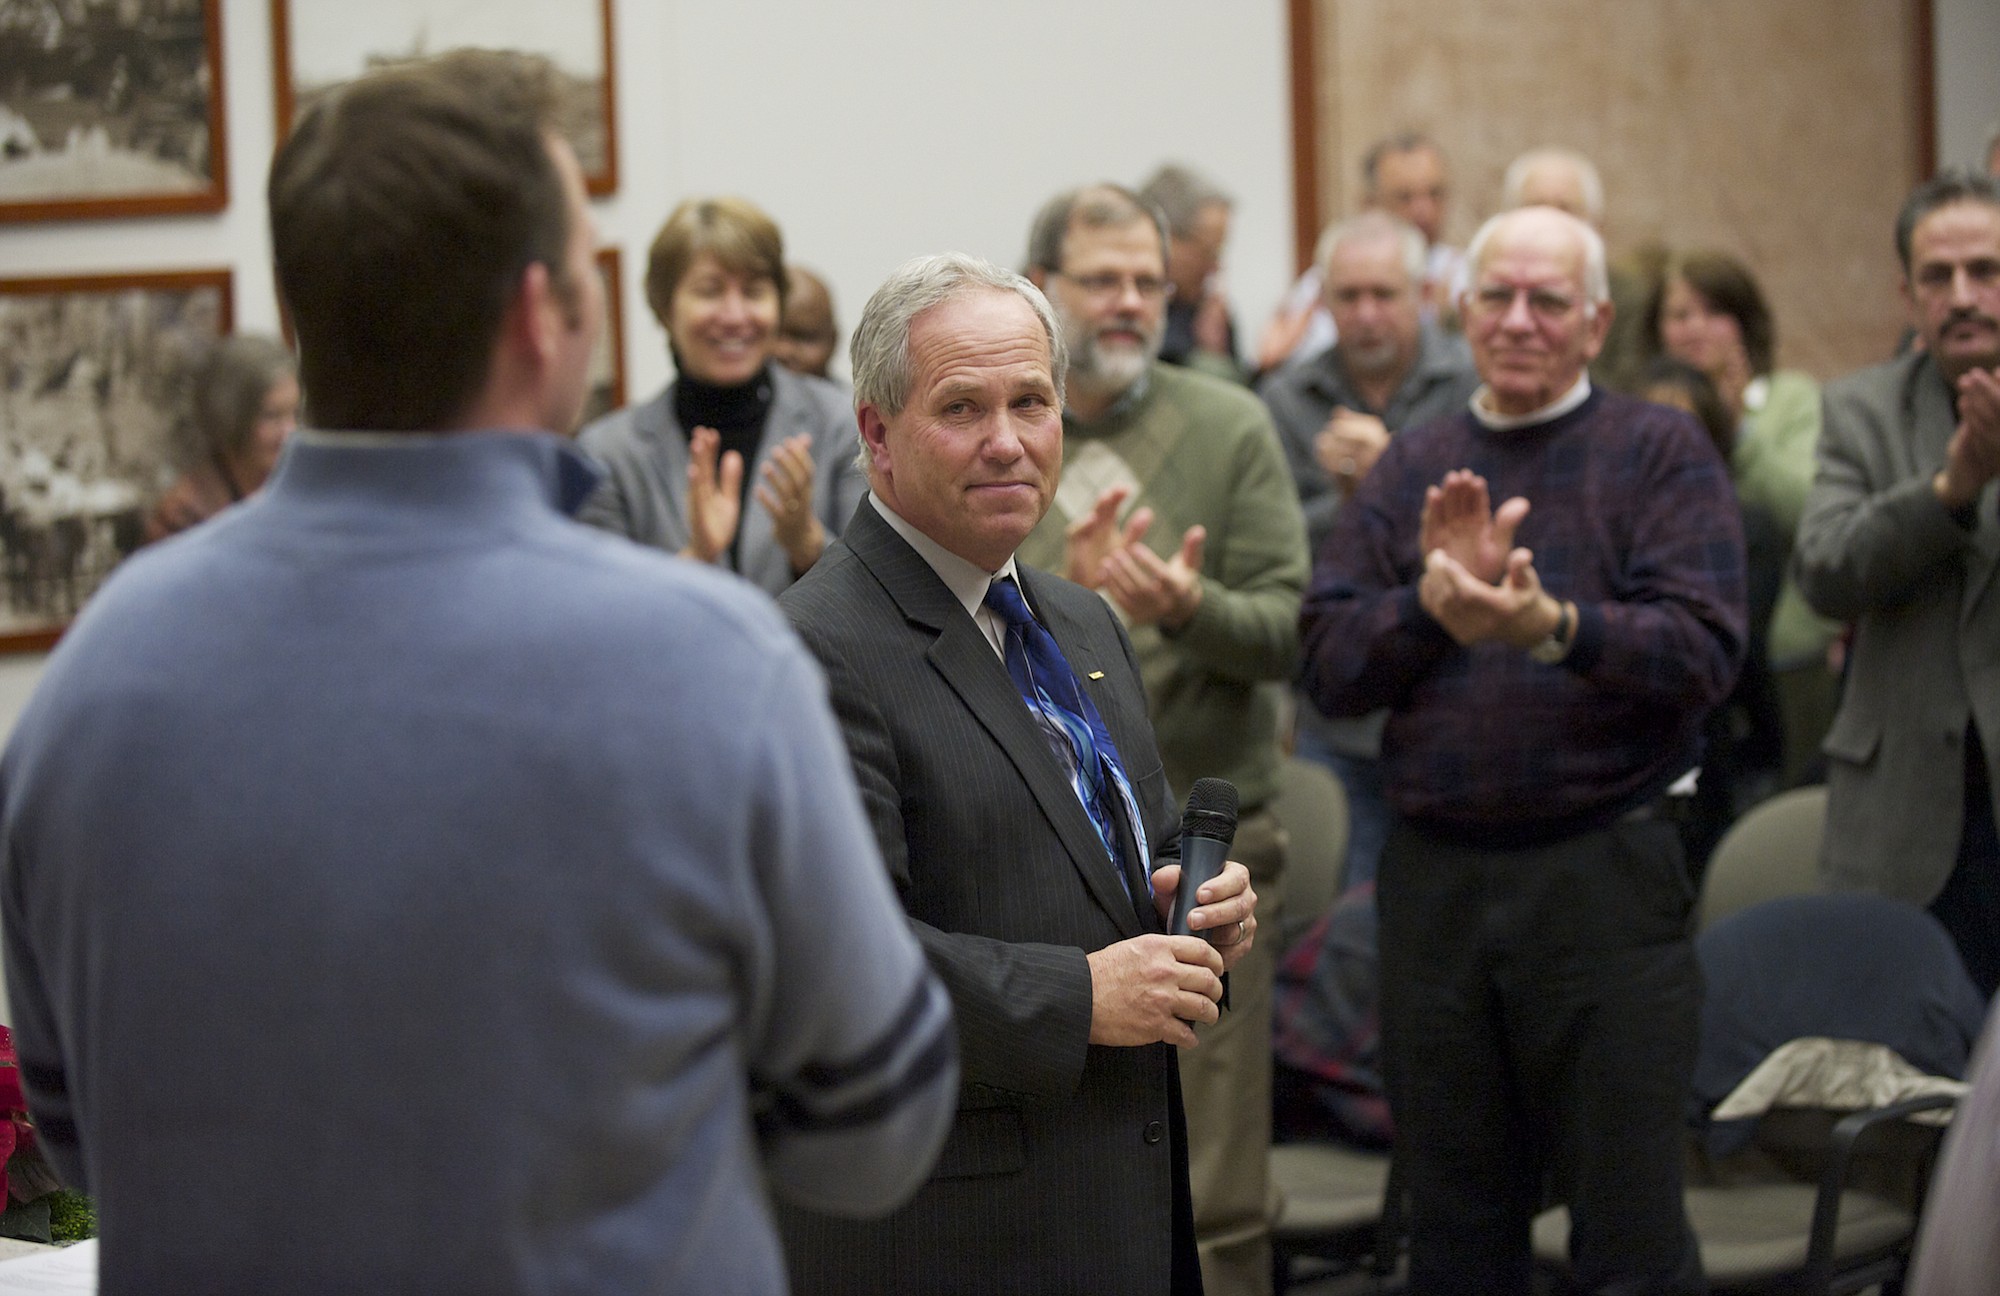 The community thanks then-Clark County Commissioner Marc Boldt for his service during an open house at the Clark County Public Service Center in December 2012 after he was voted out of office.